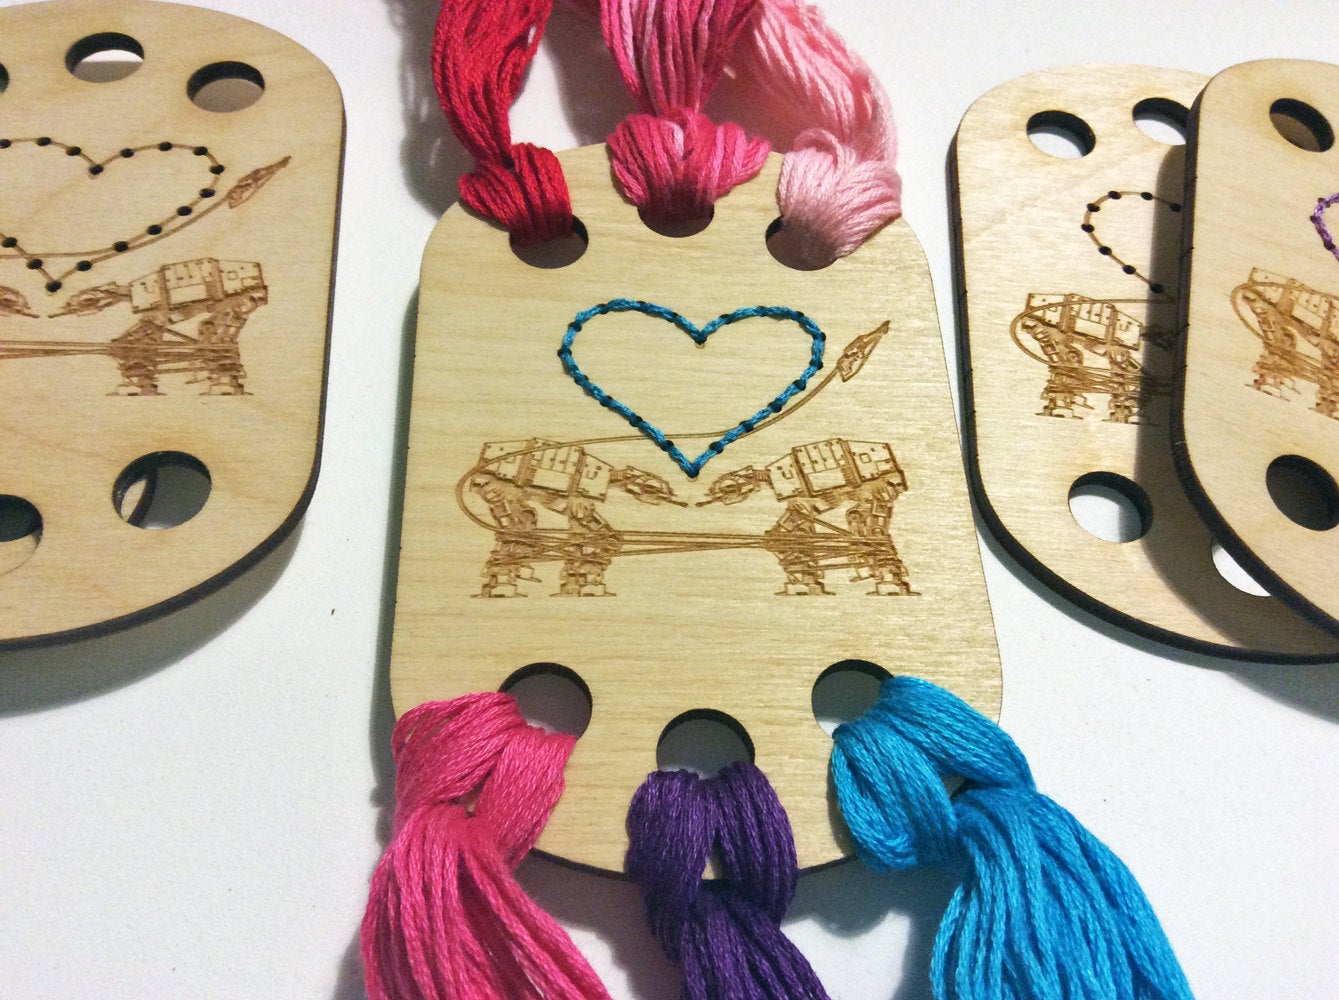 Craft Supply: Embroidery Floss Organizer - Love AT-AT First Sight